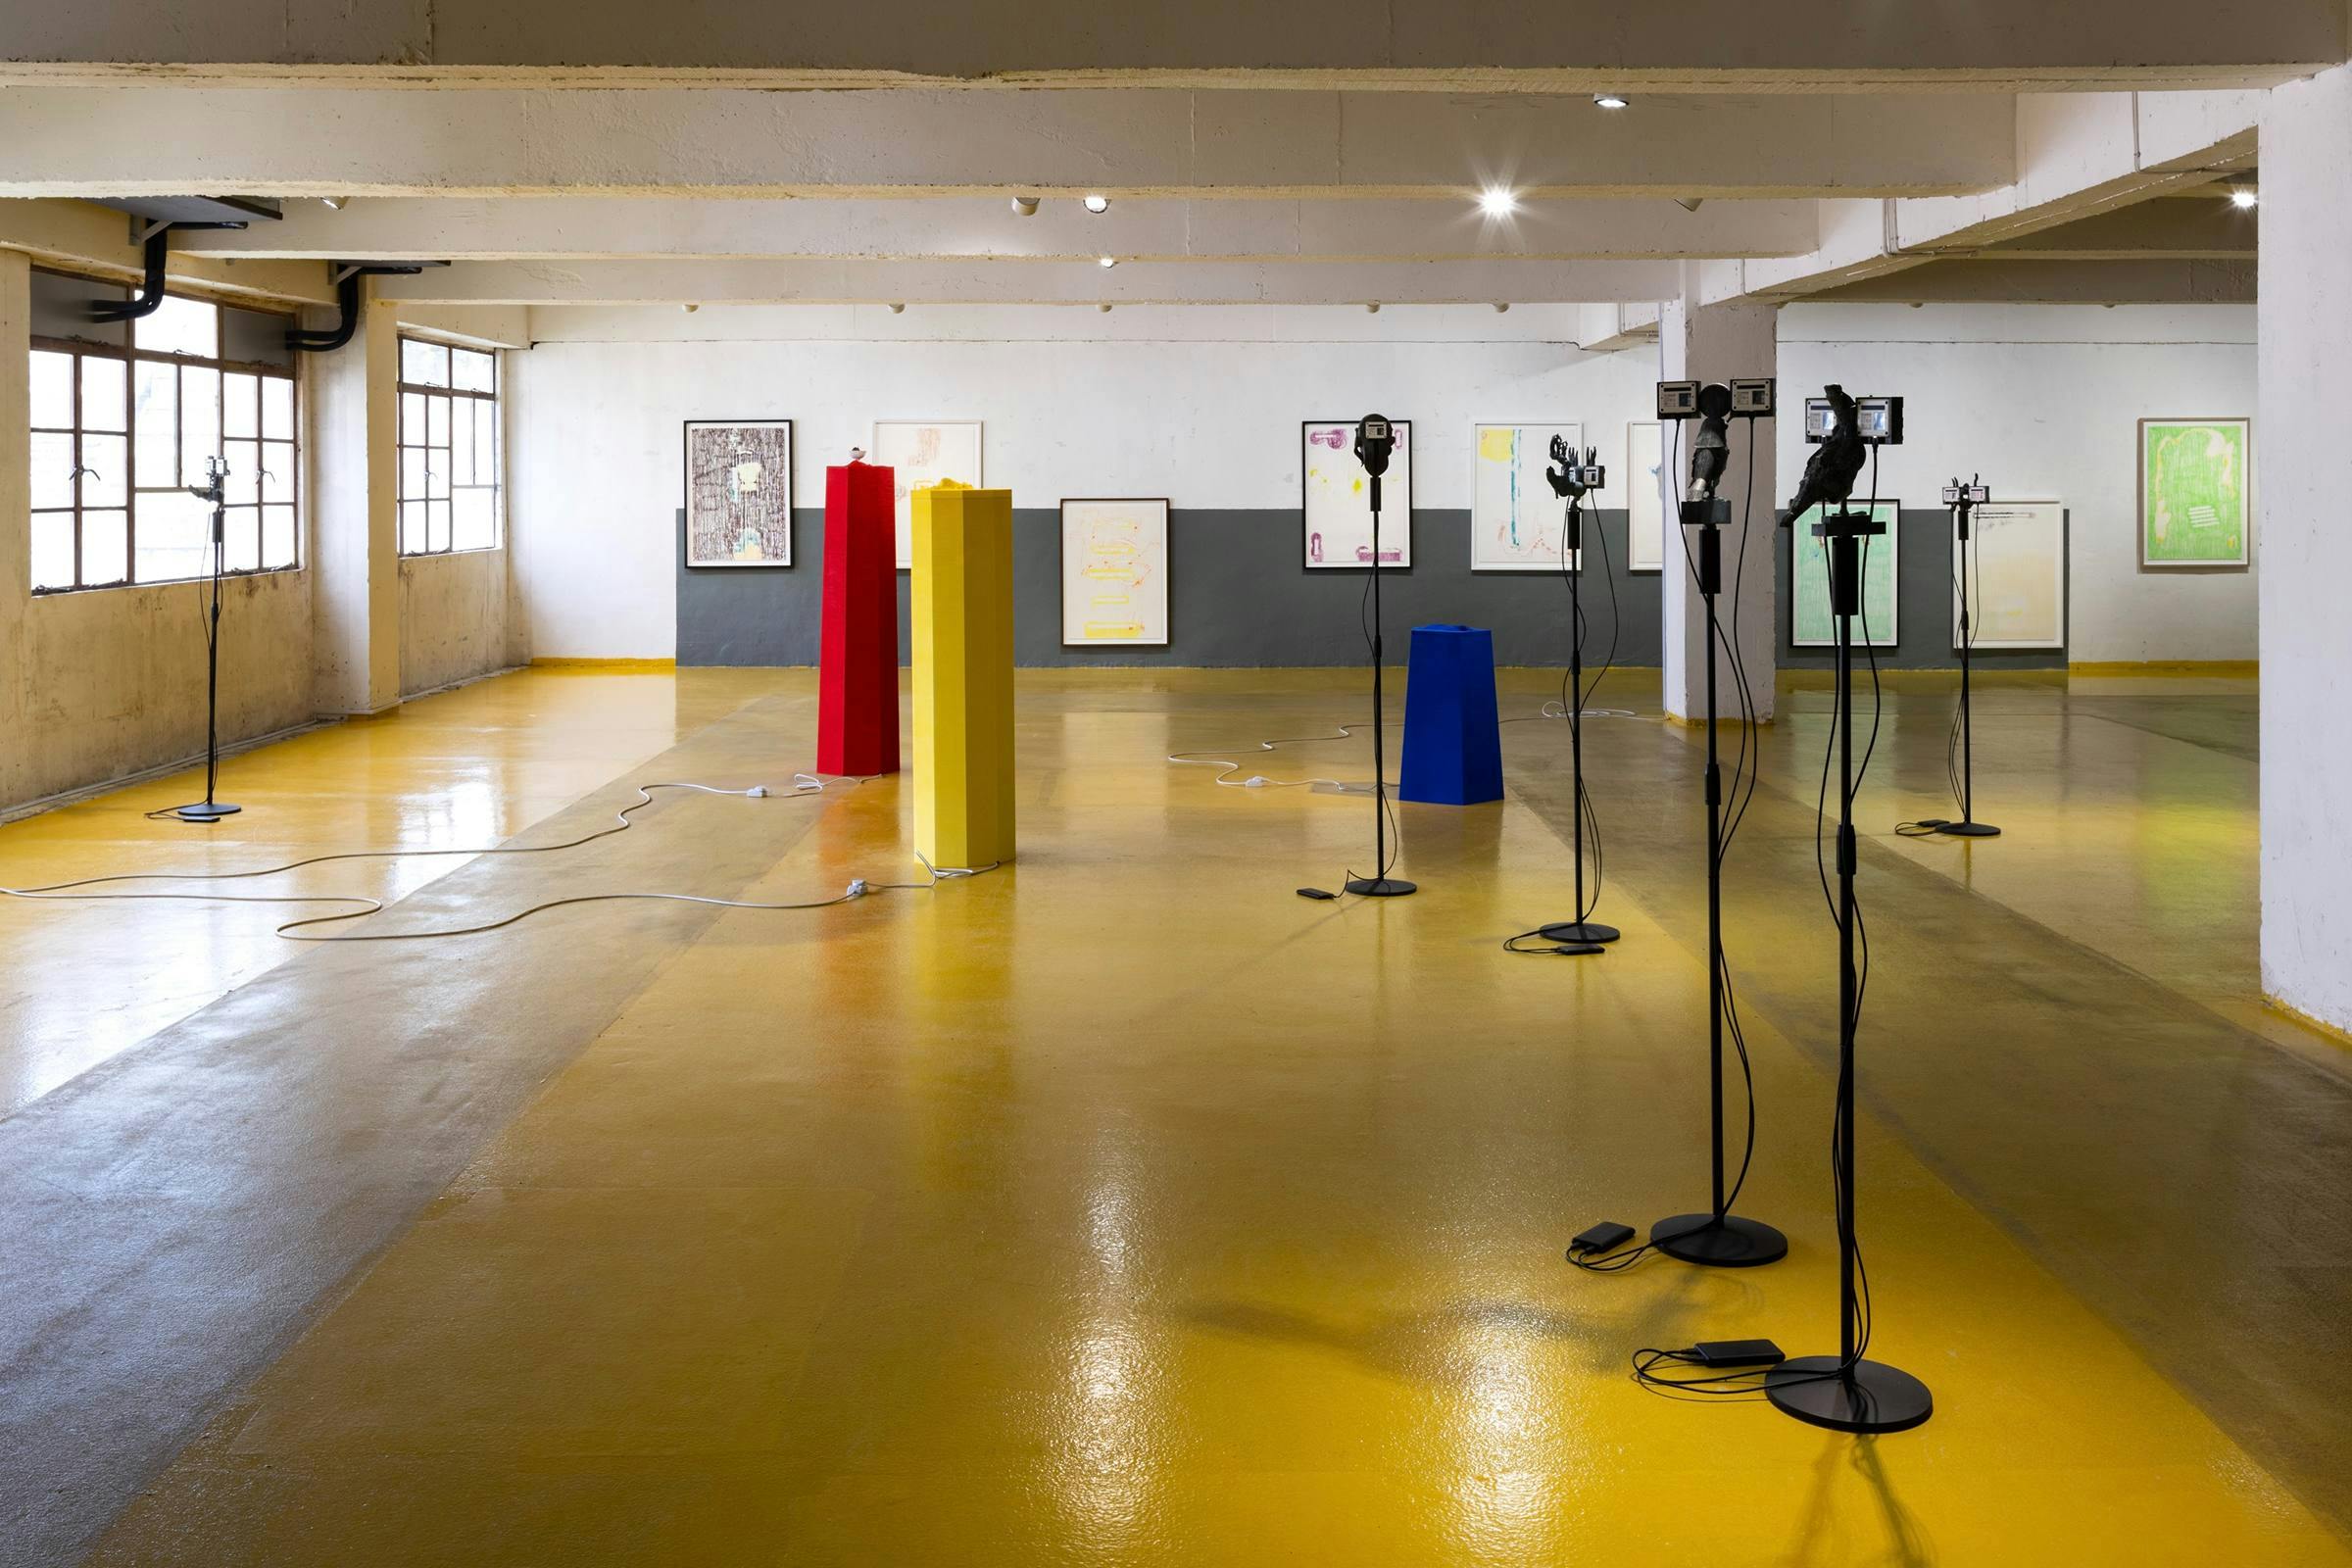 Installation view, Samson Young, The messengers from Music for selective hearing, or assisted living, 24 September - 5 November 2022, Kiang Malingue, Hong Kong. Multiple art works are visible in an industrial space that has a yellow floor